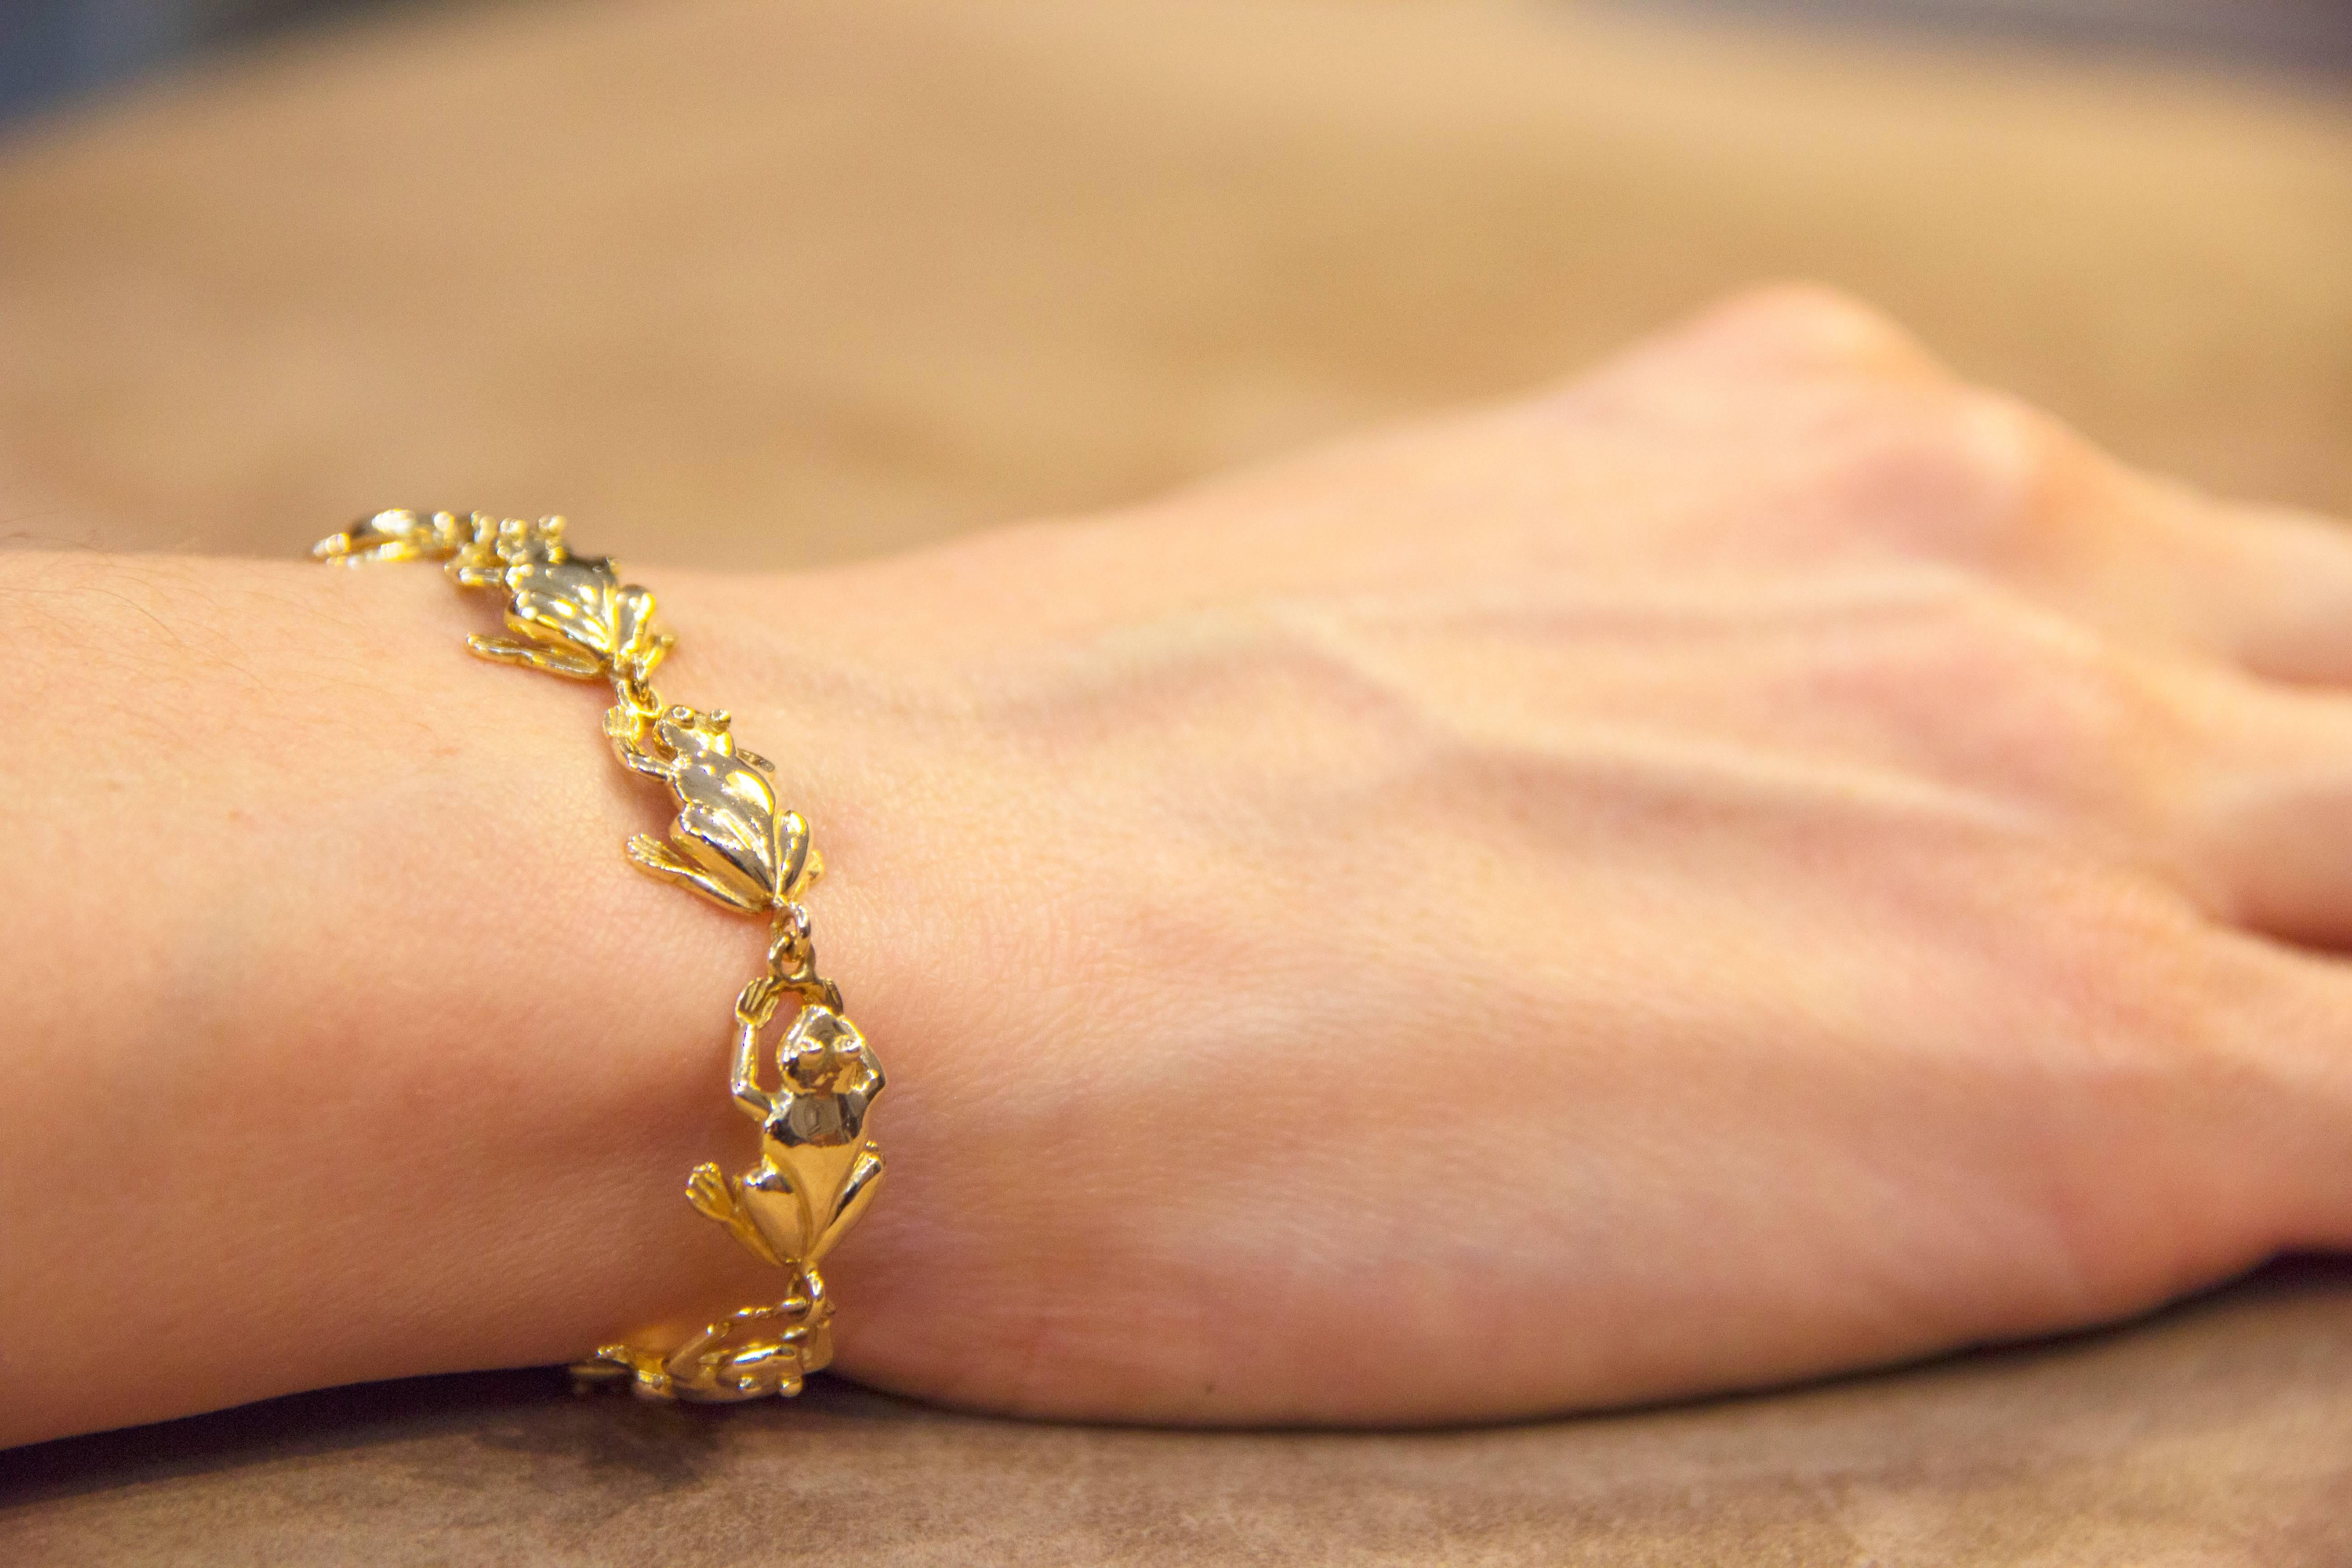 Jona design collection, hand crafted in Italy, 18 karat yellow gold link frogs bracelet. Dimensions: 17 cm Lenght / 1 cm Width.
All Jona jewelry is new and has never been previously owned or worn. Each item will arrive at your door beautifully gift